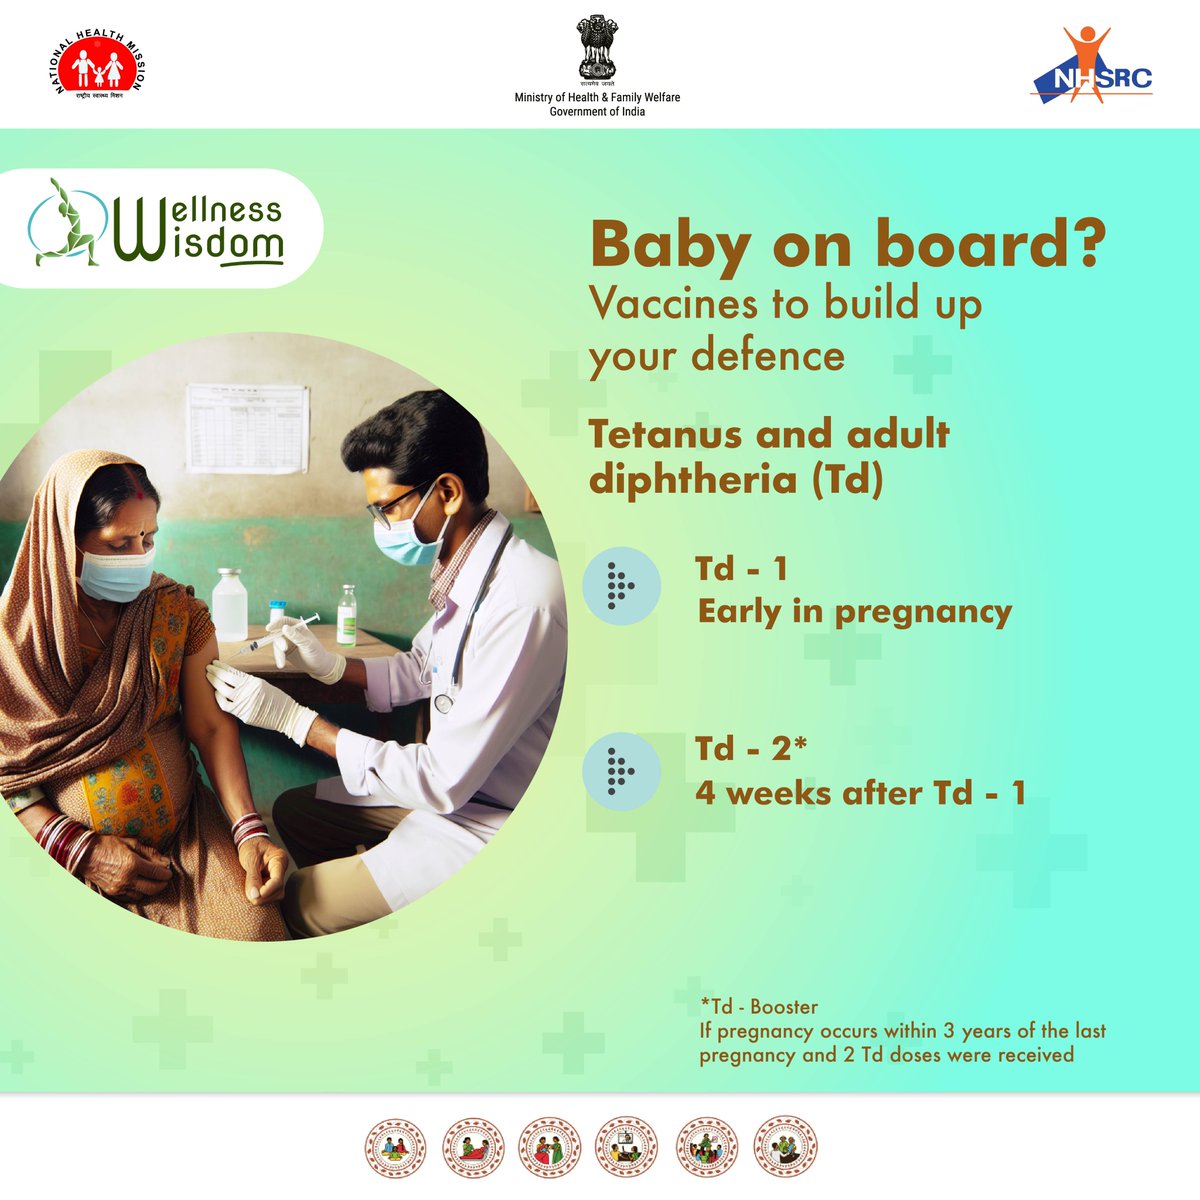 🤰🏽👶🏽 Pregnant & prepped for a healthy baby? Don't forget to get yourself #vaccinated at the nearest #AyushmanArogyaMandir to ensure that you and your little one stay protected💉💪🏽

#HealthyPregnancy